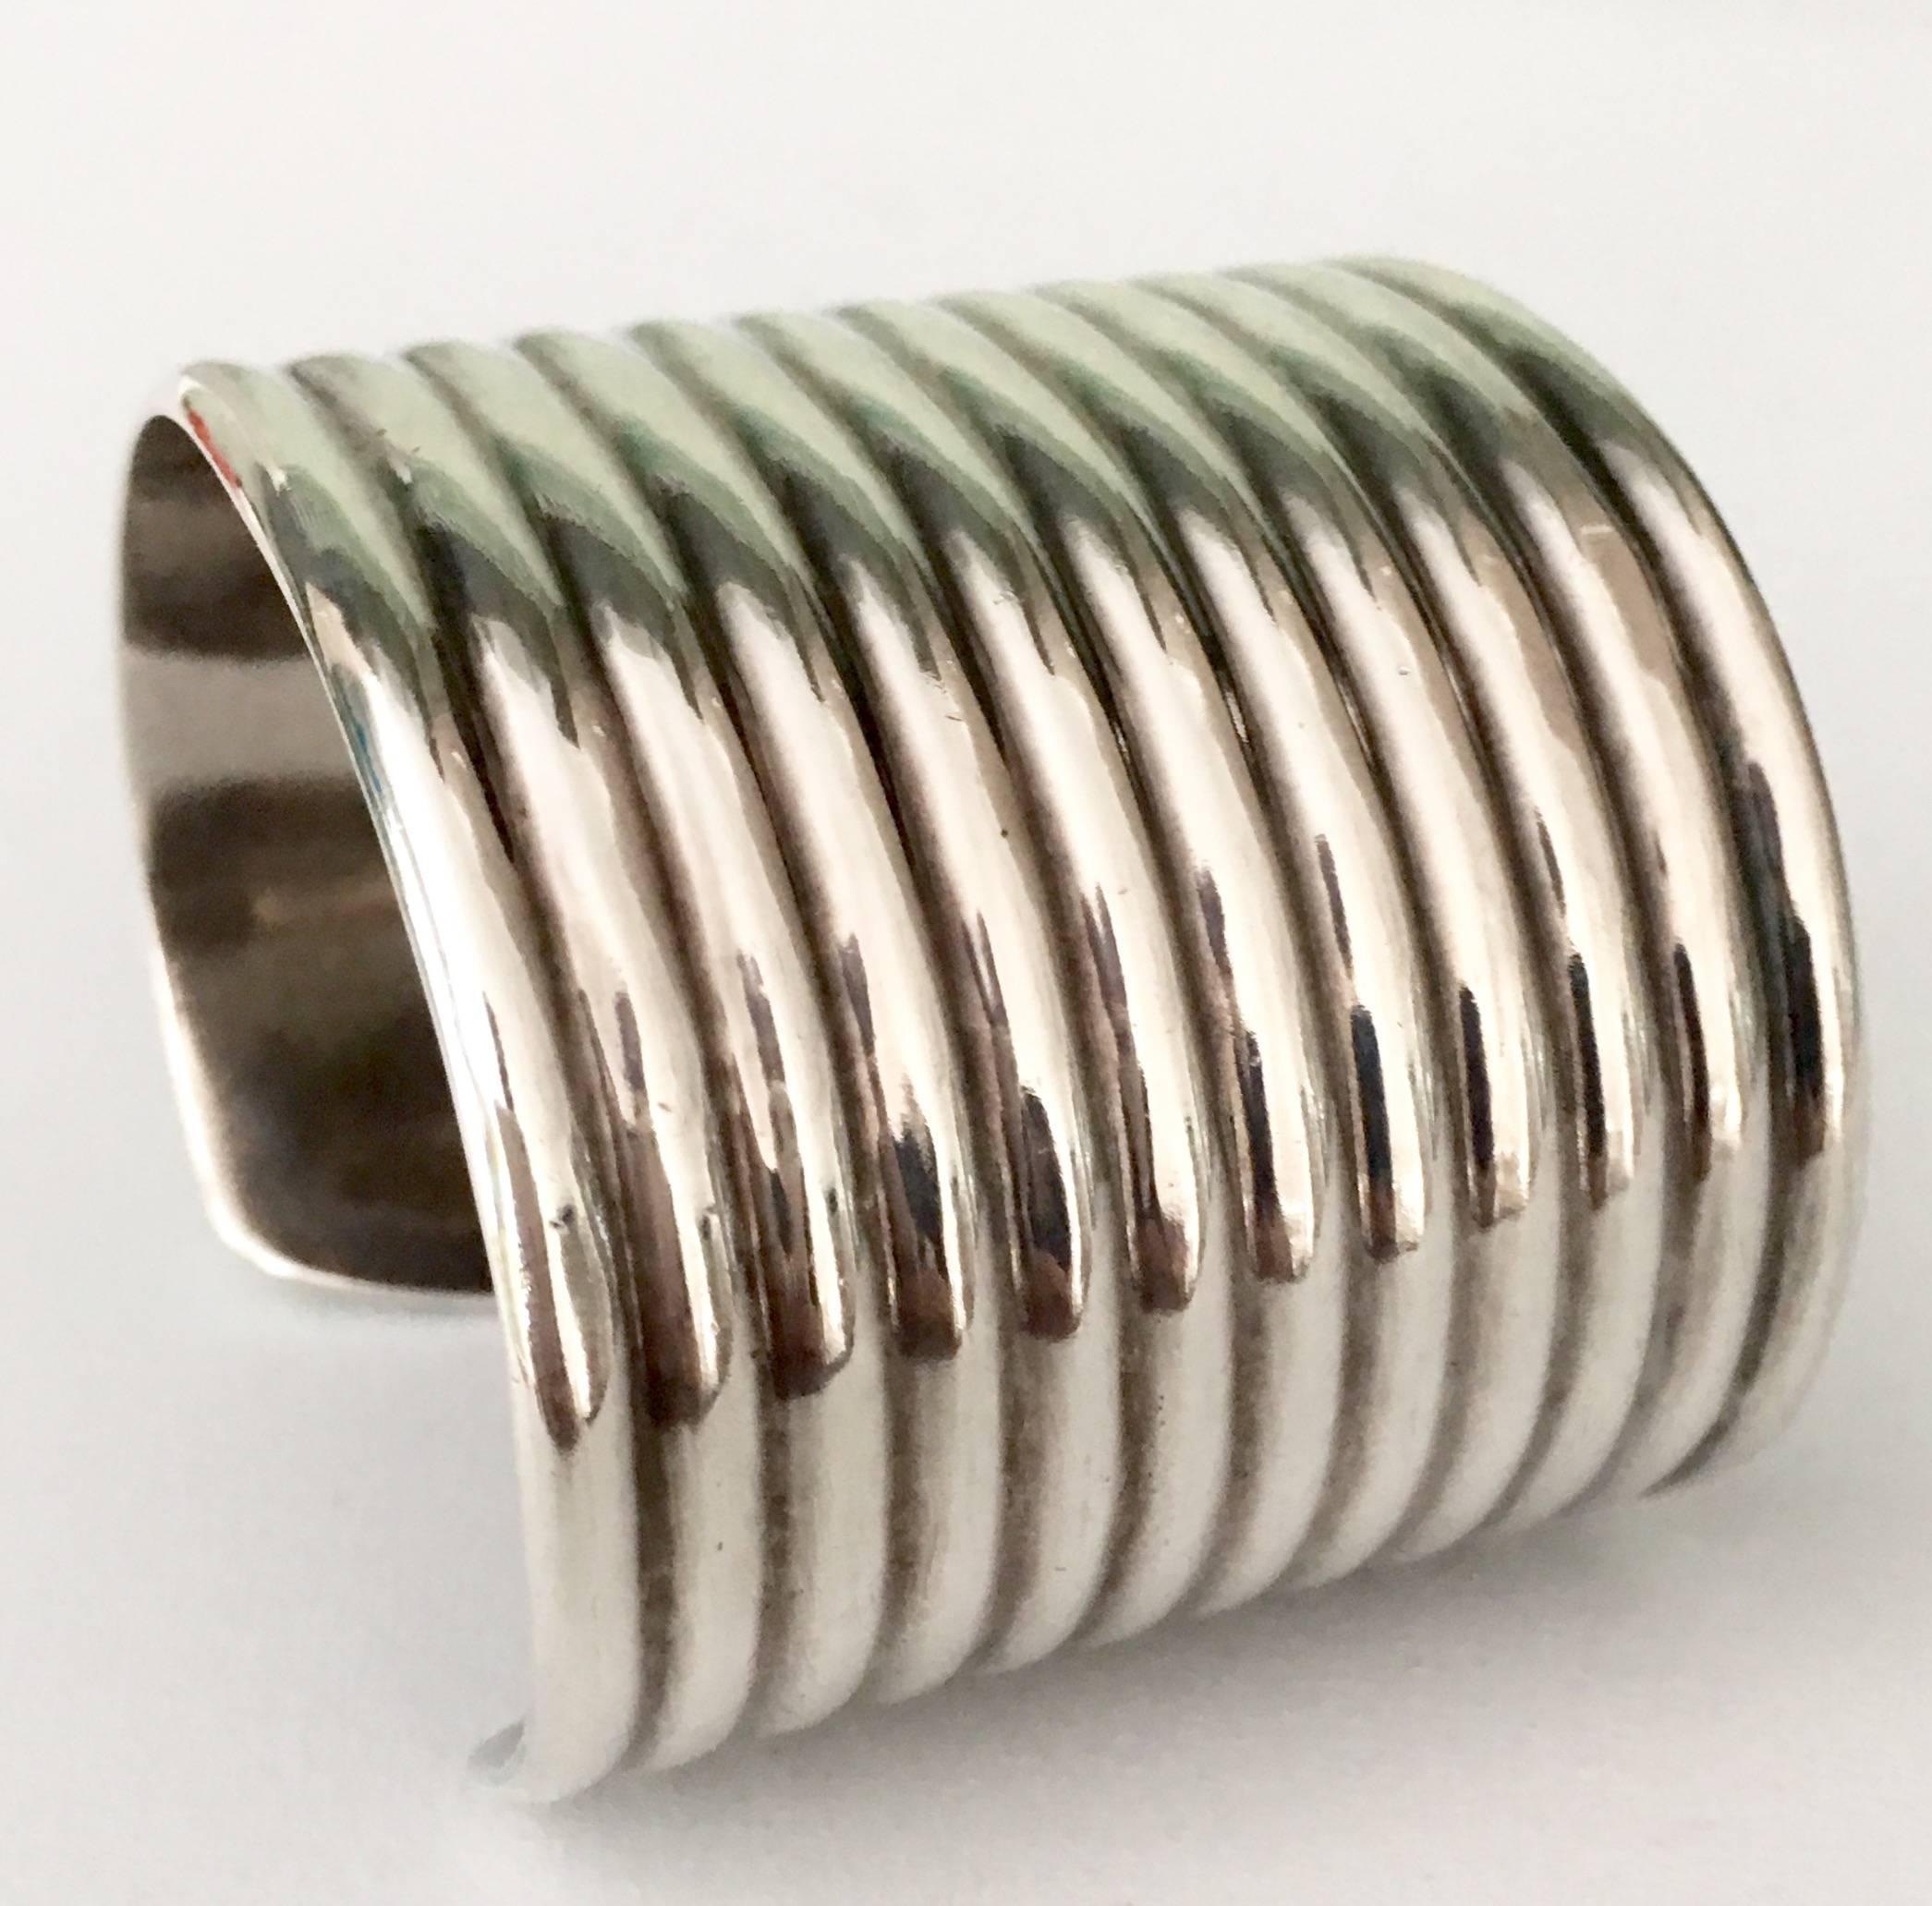 Classic sterling silver 12 strand cuff bracelet. Signed on the underside, 850 TN-01, Mexico. Total weight, 86 grams. Opening measurement is 1.13